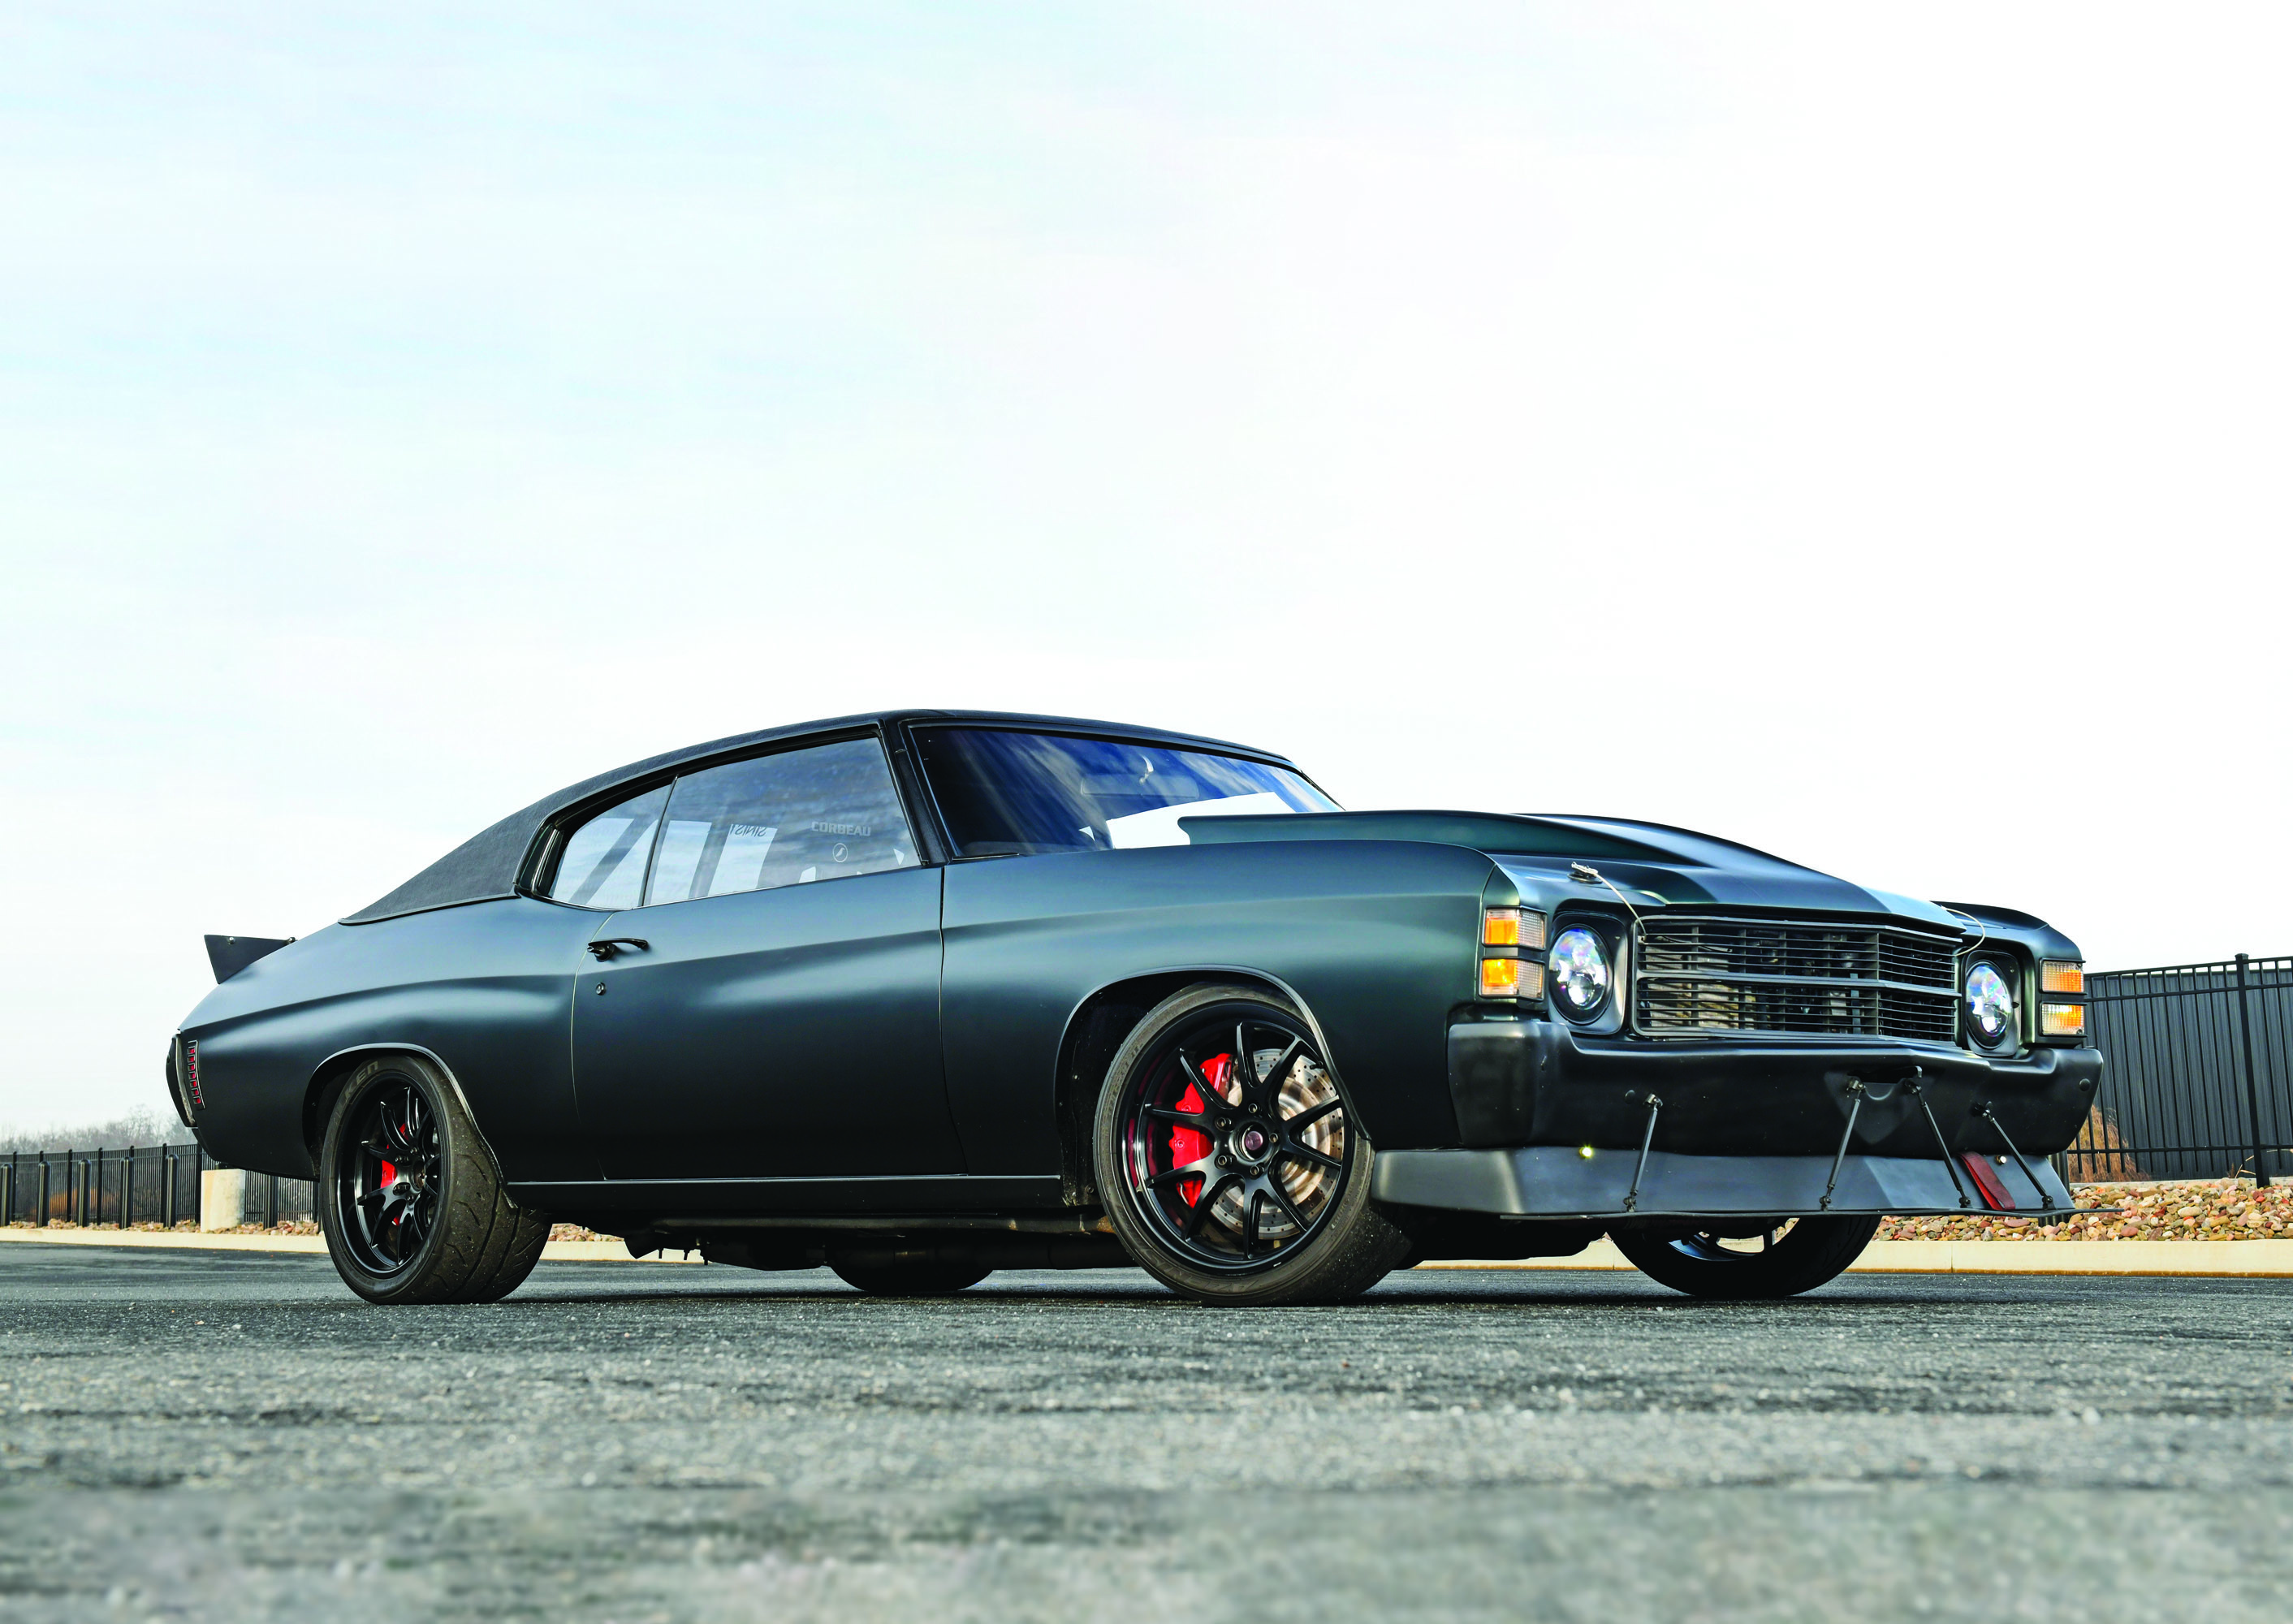 The Evolution Of A Chevelle, From Commuter To Corner-Carver